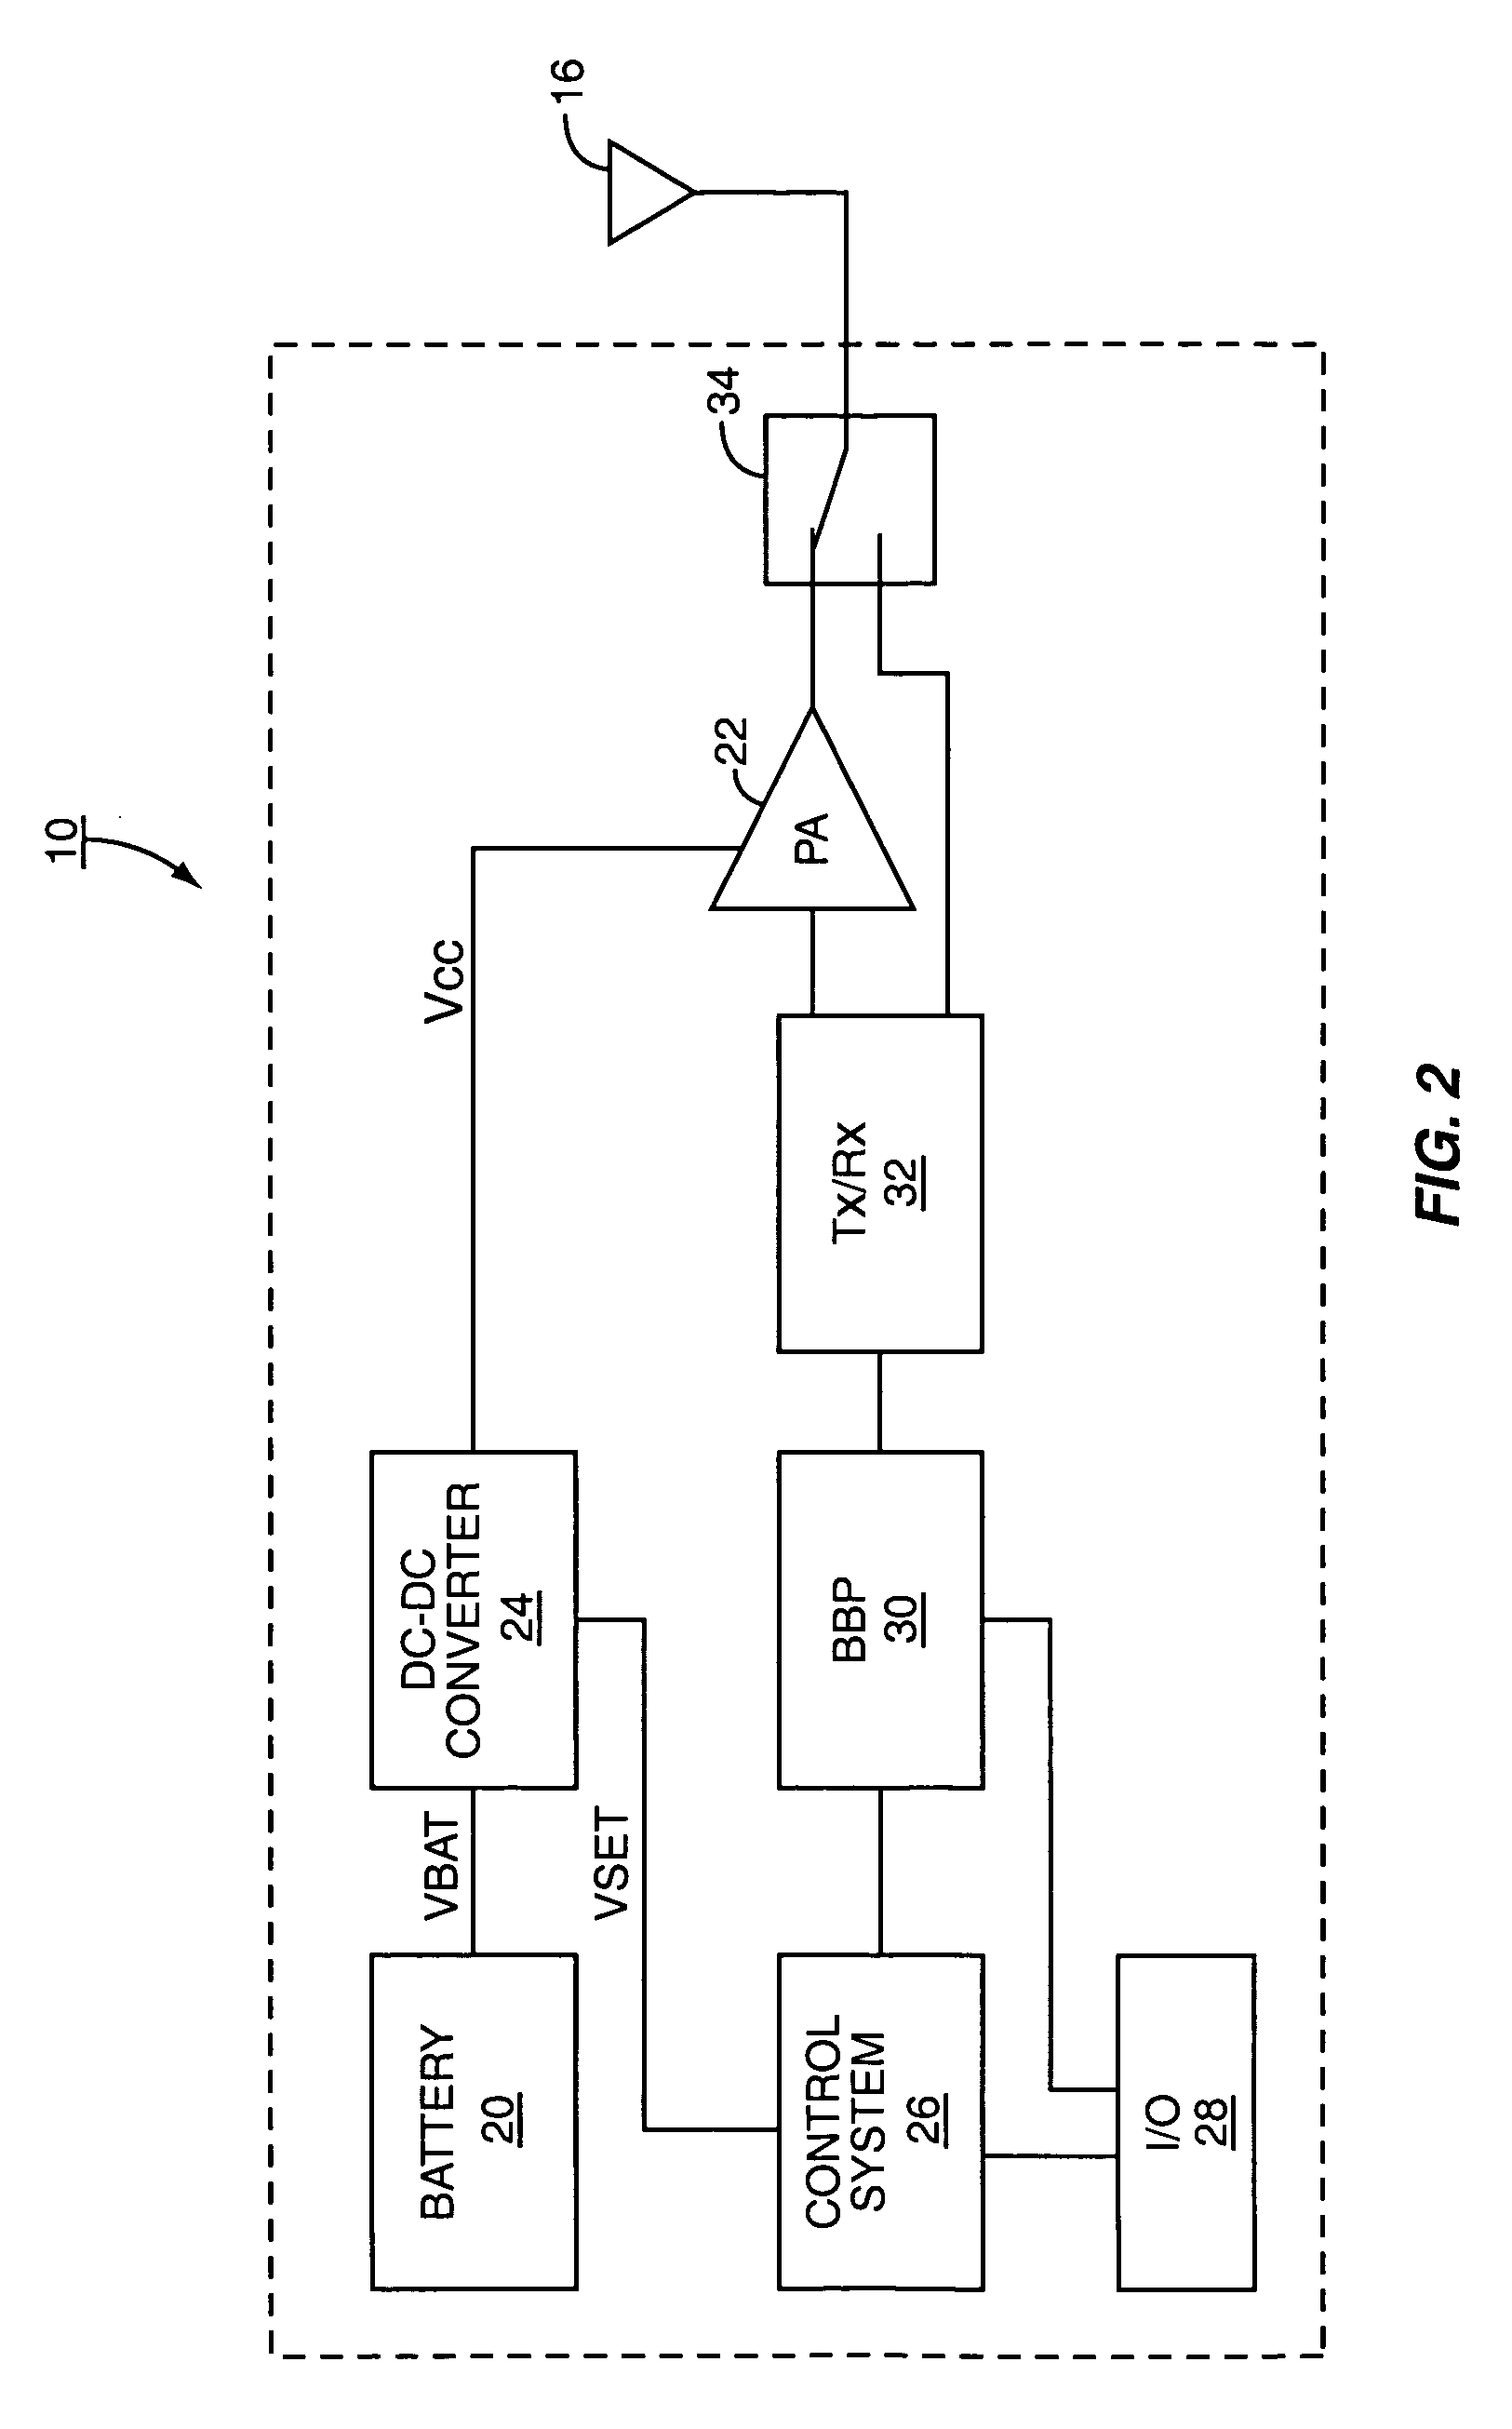 Multi-phase switching power supply for mobile telephone applications